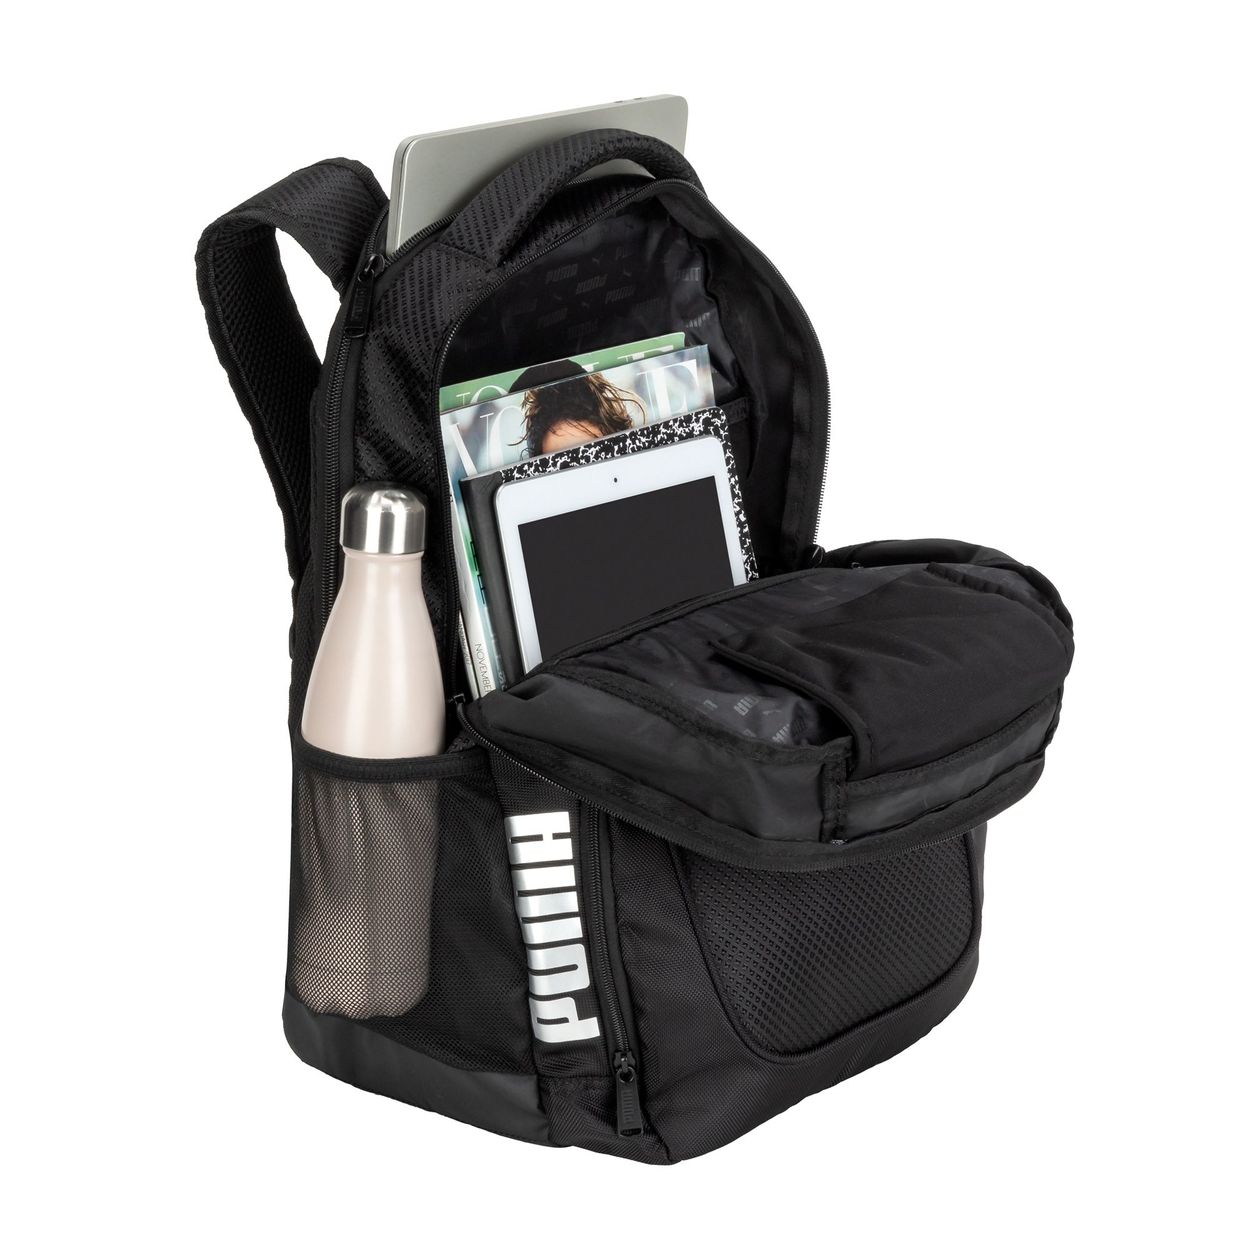 Image of bag with water bottle holder